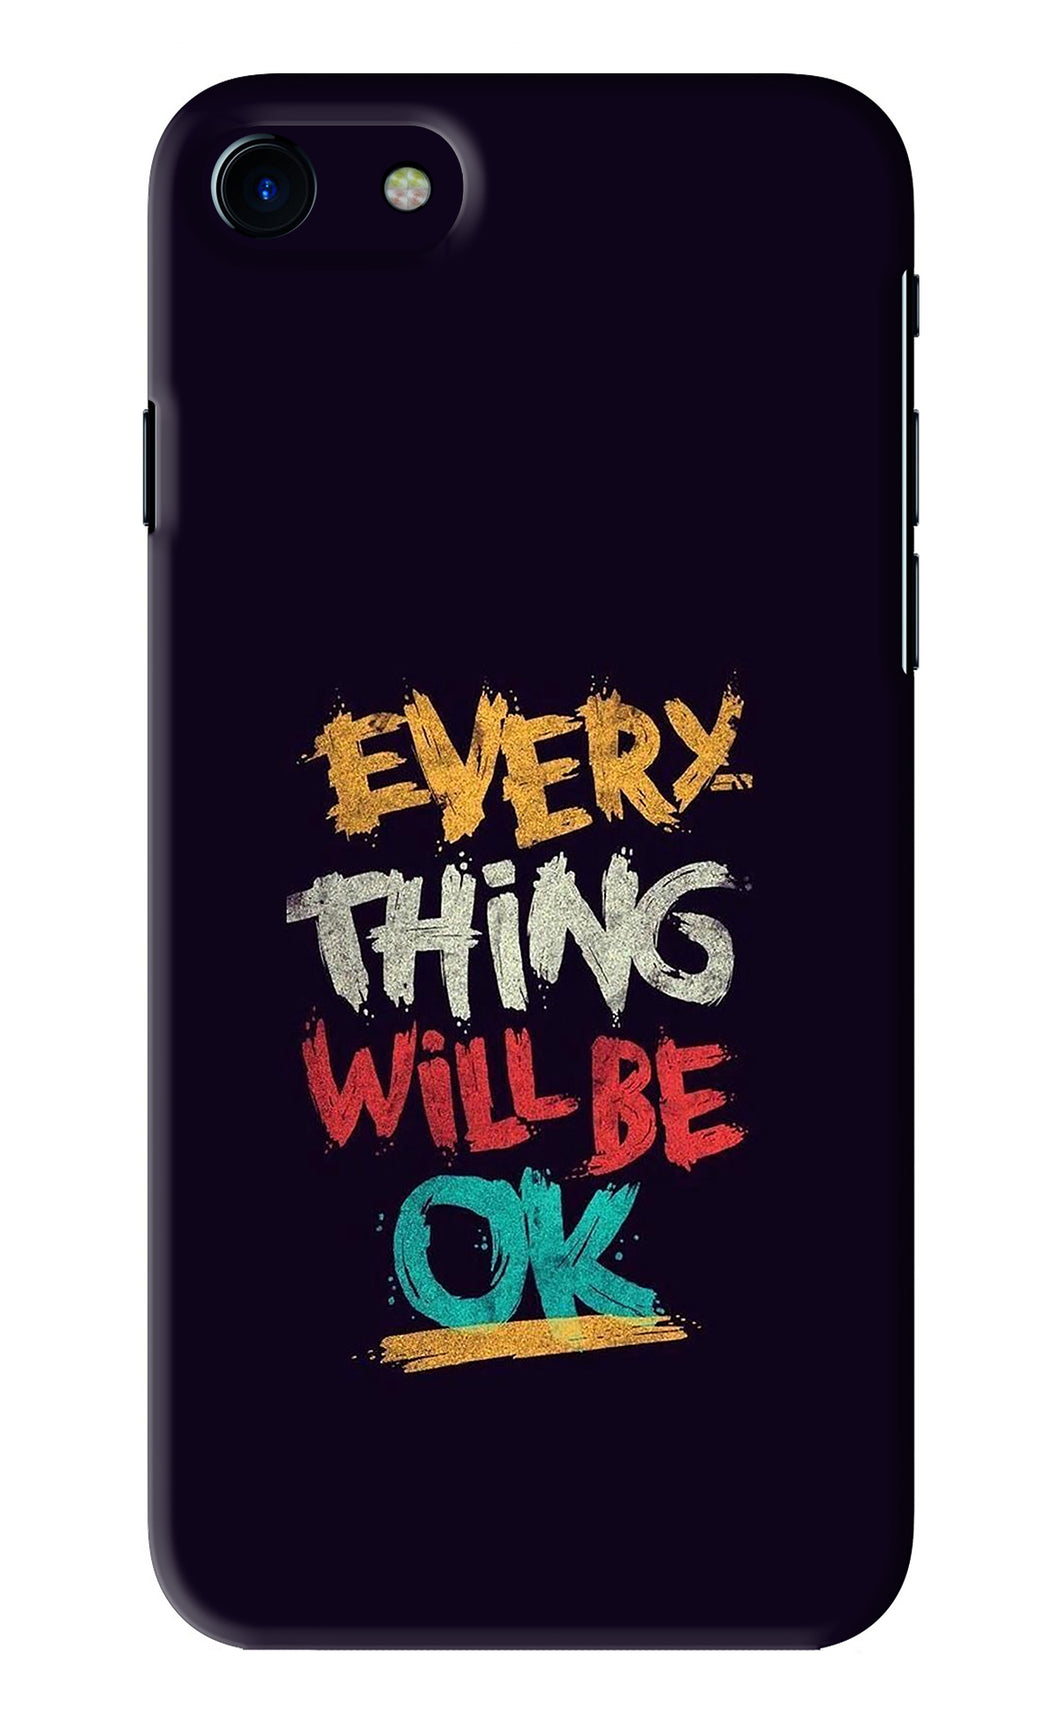 Everything Will Be Ok iPhone 7 Back Skin Wrap